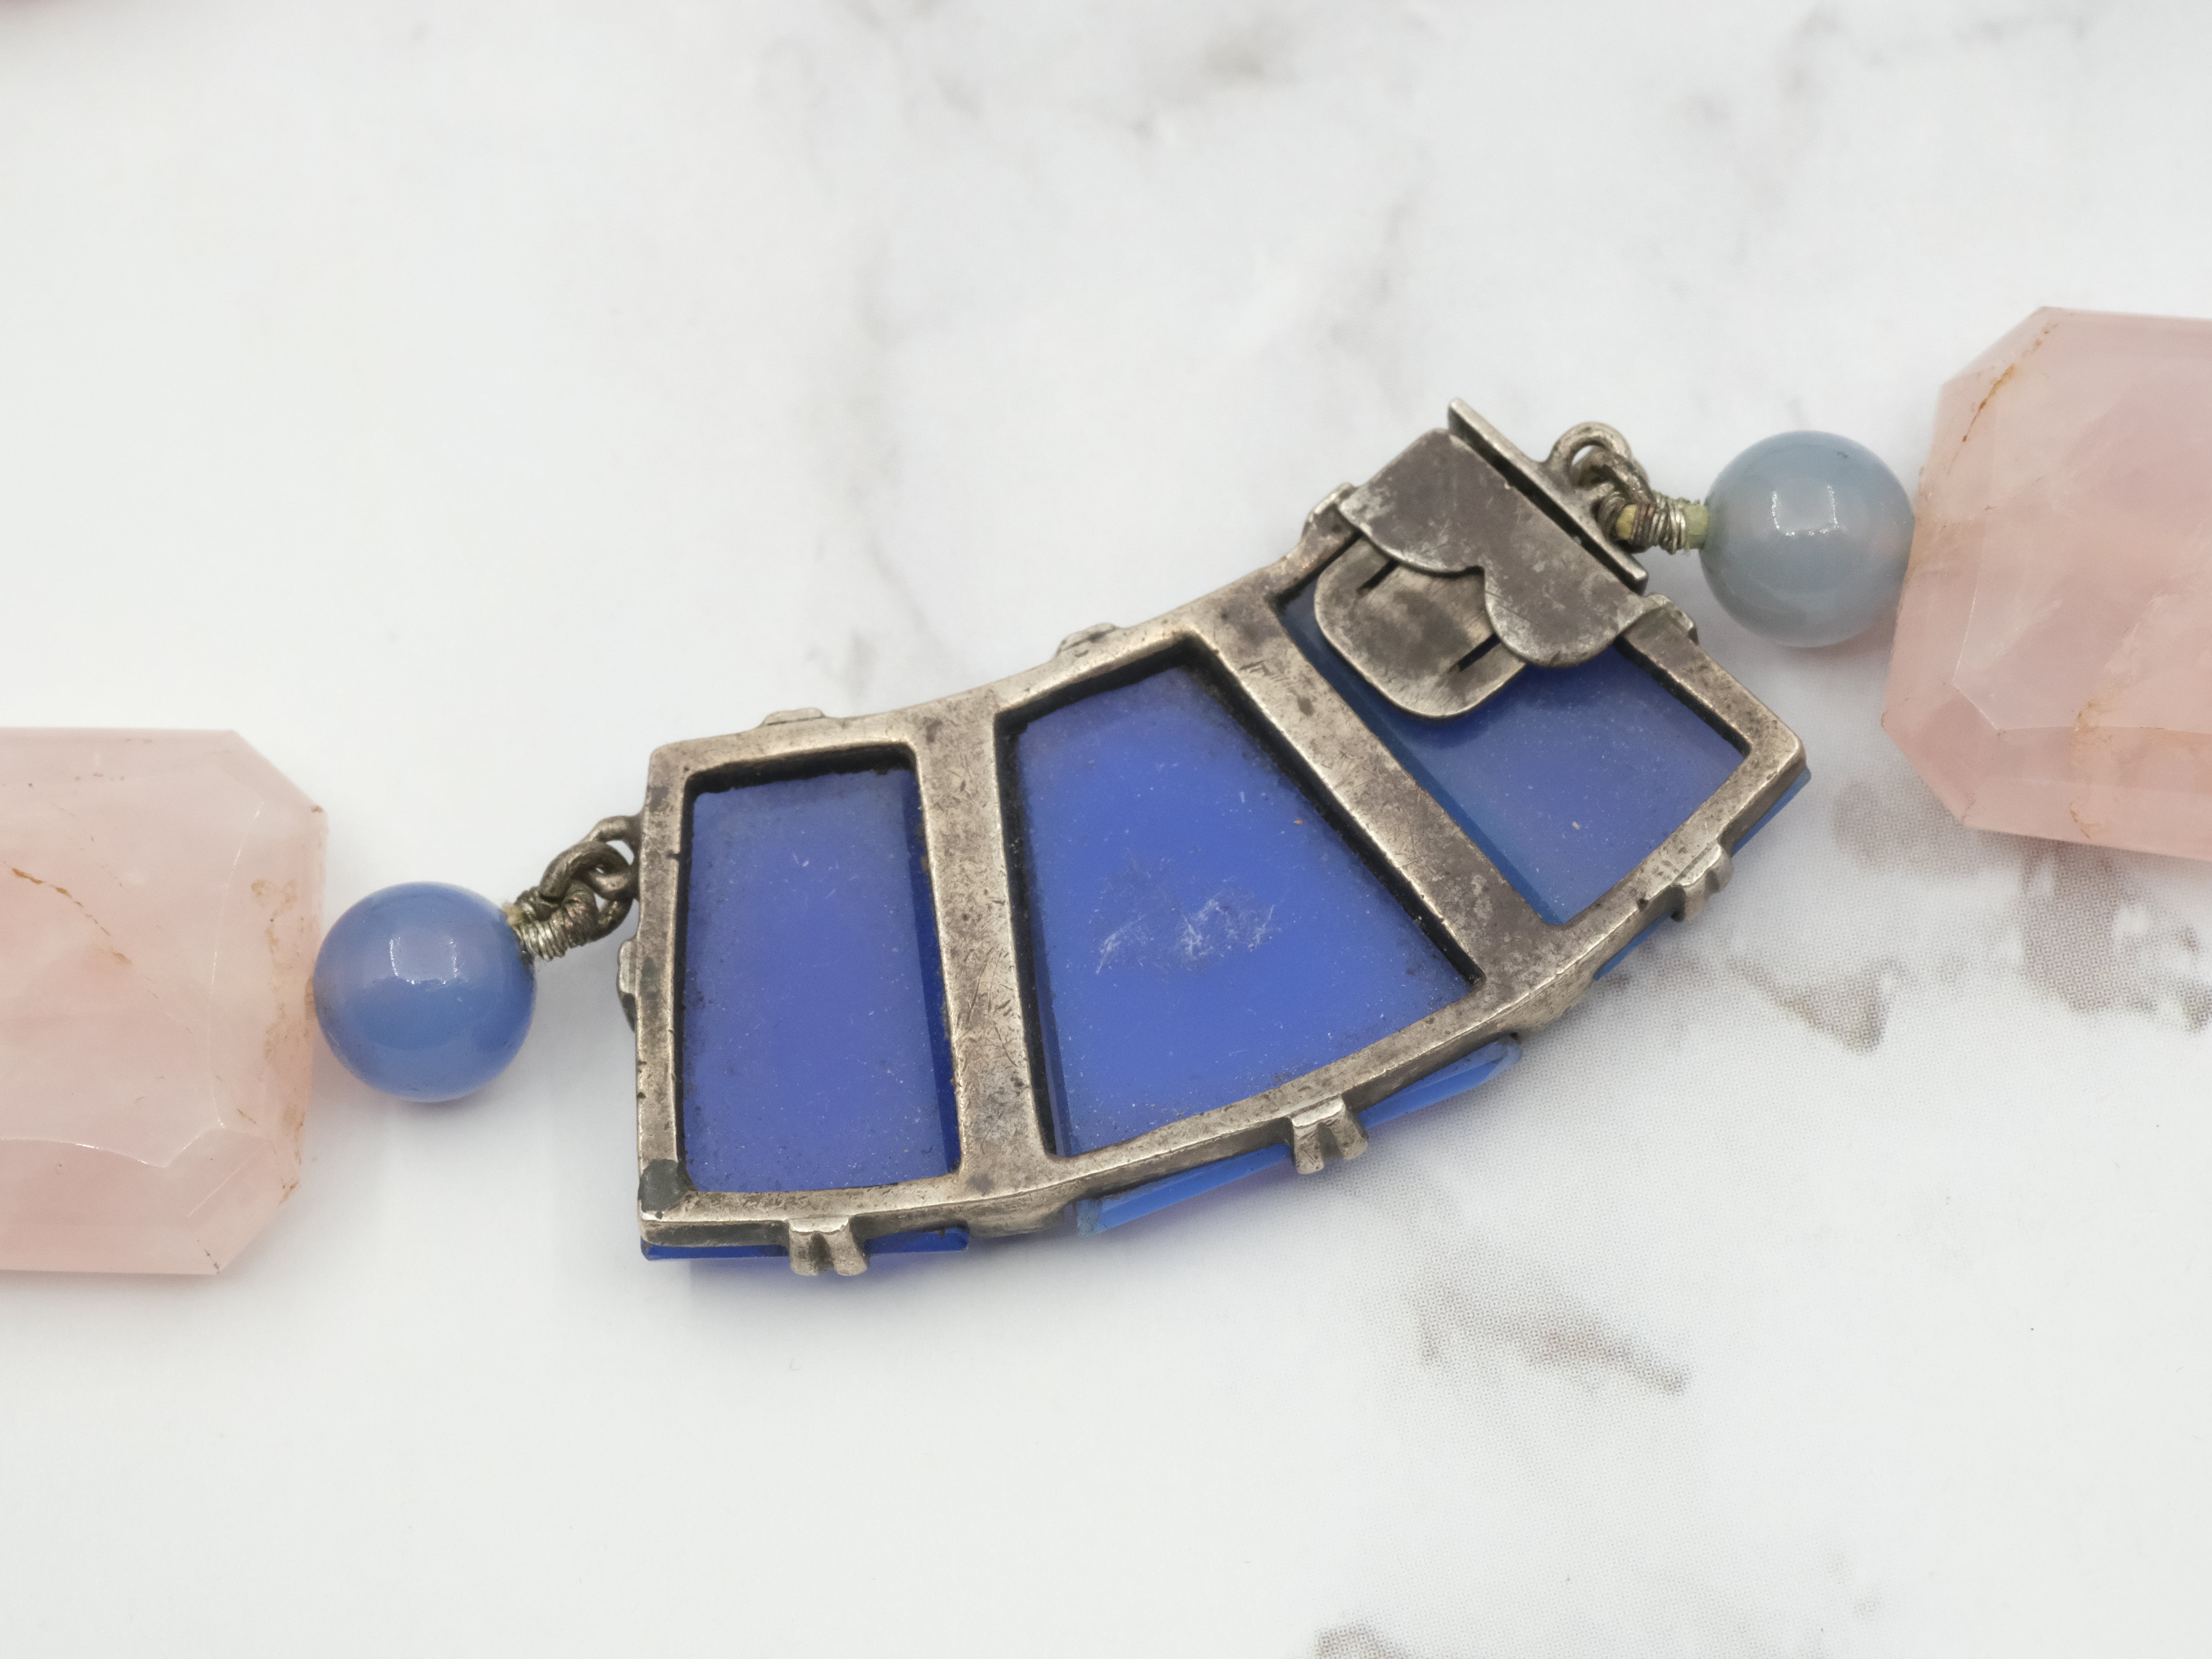 Incredible antique German Art Deco rose quartz and blue chalcedony necklace with sterling and marcasite statement clasp